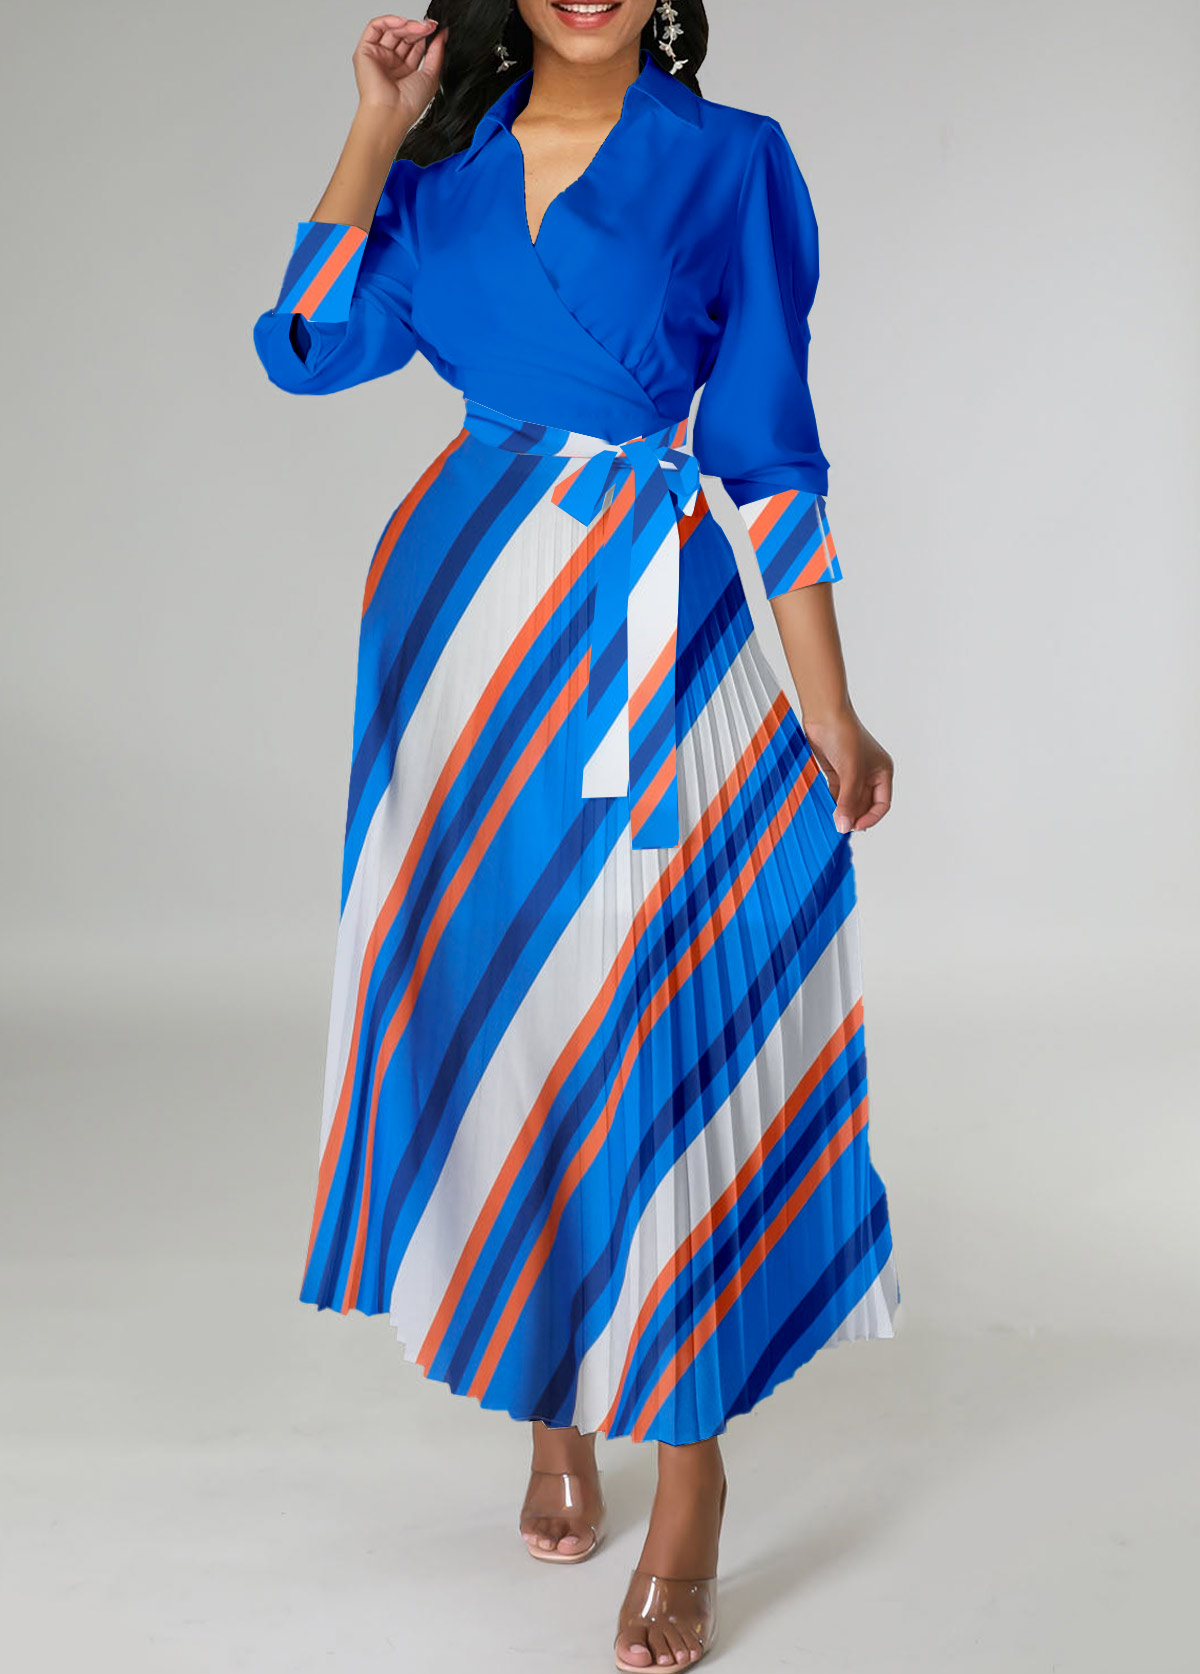 Striped Pleated Belted Royal Blue Cross Collar Dress